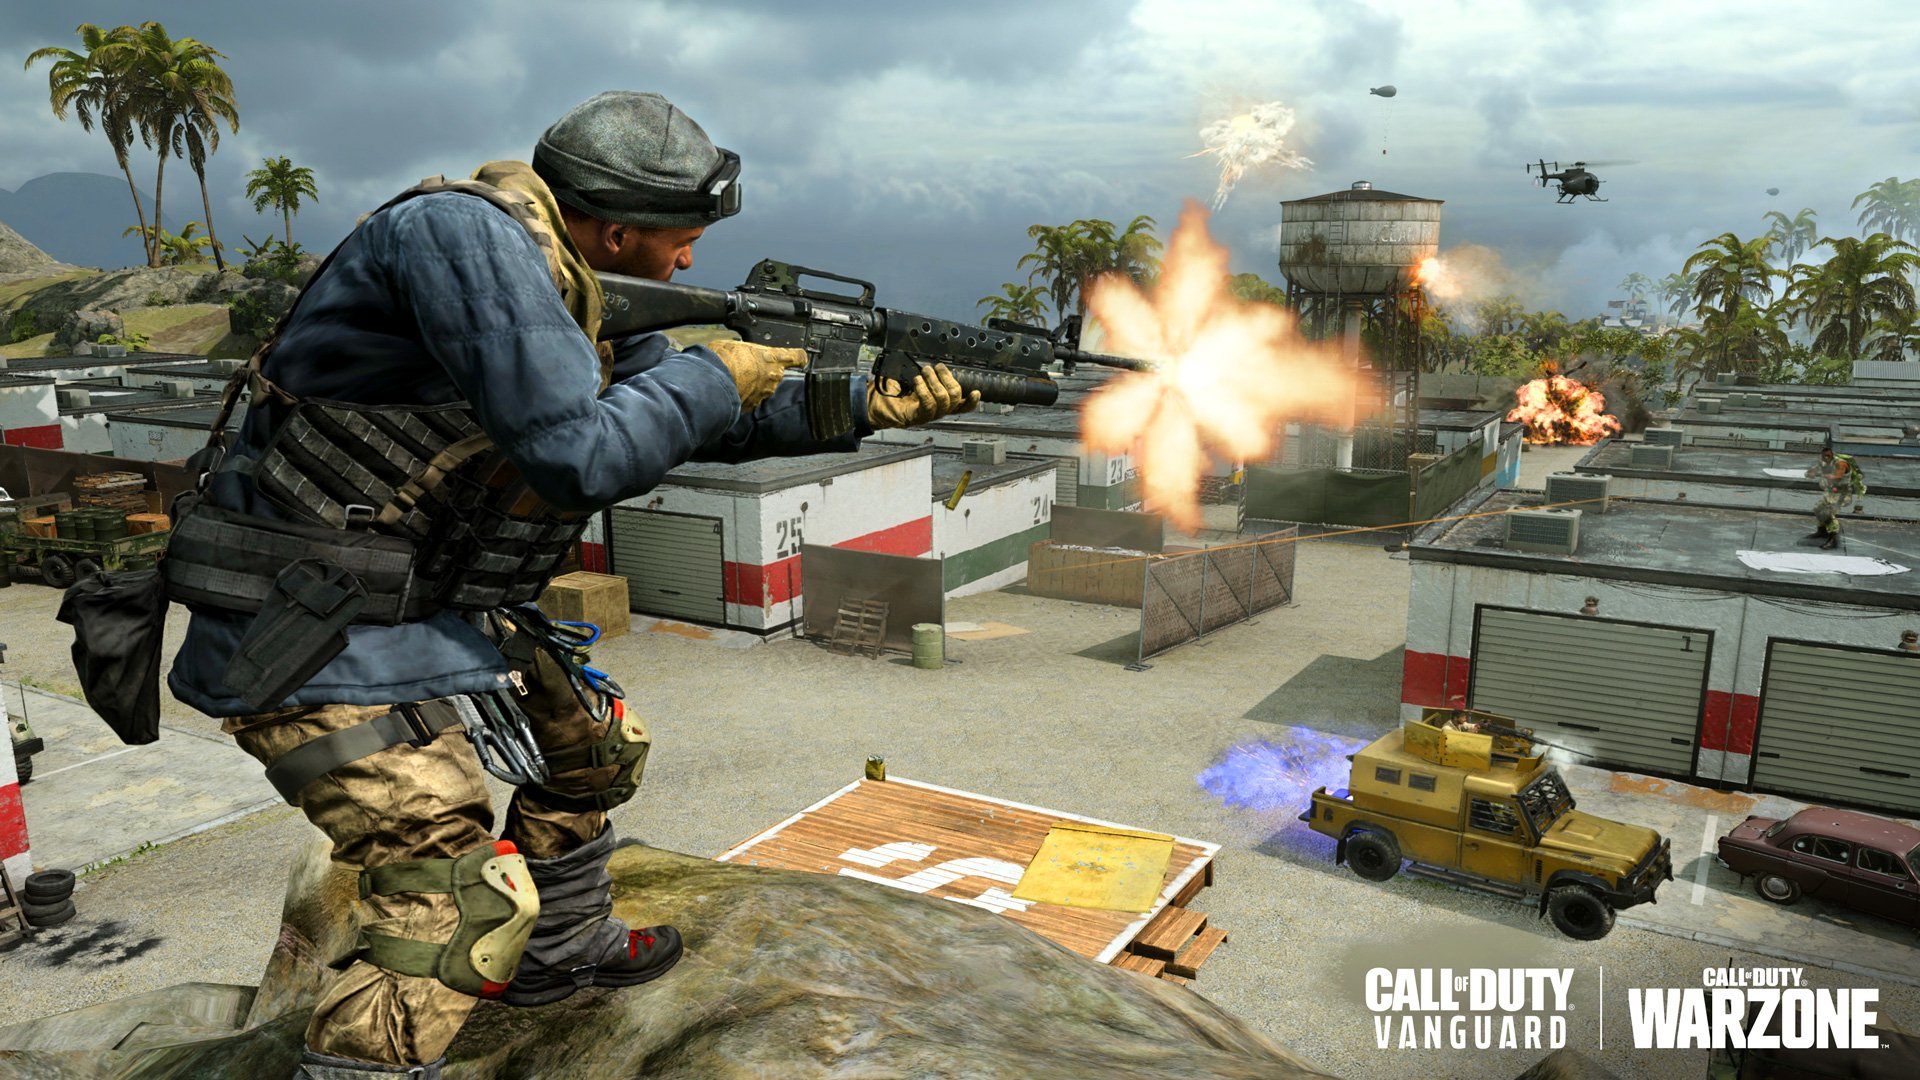 Call of Duty Warzone Mobile officially announced ahead of full reveal next week | VGC